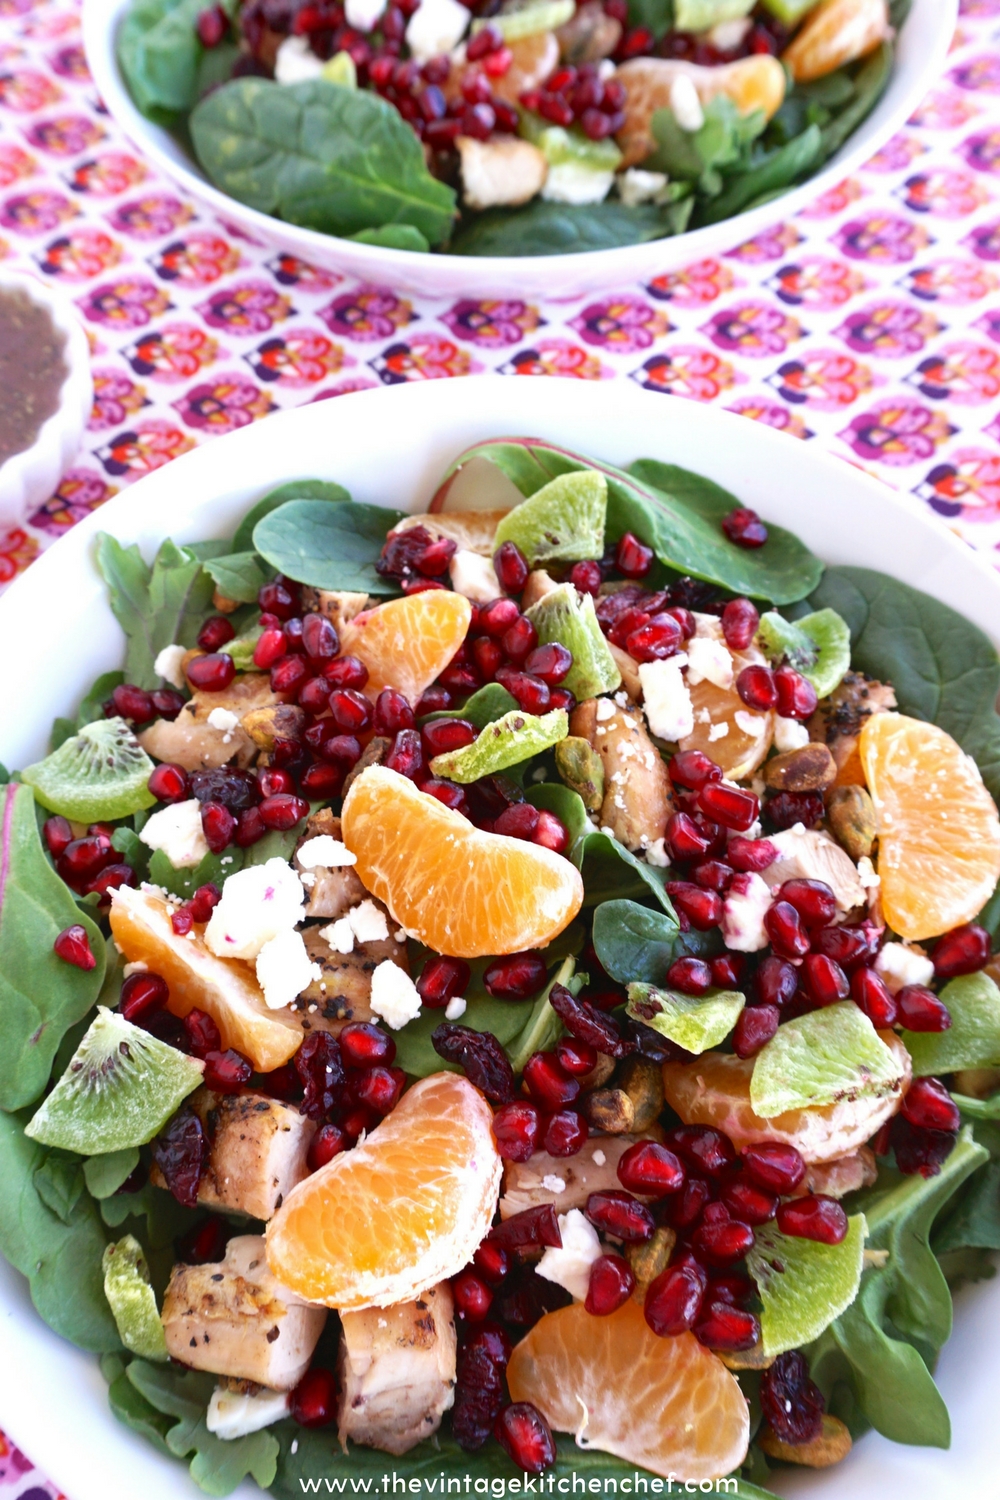 Lots of flavors and vibrant colors make this holiday salad one you'll want to enjoy throughout the year! It's a fresh and healthy main entree salad.